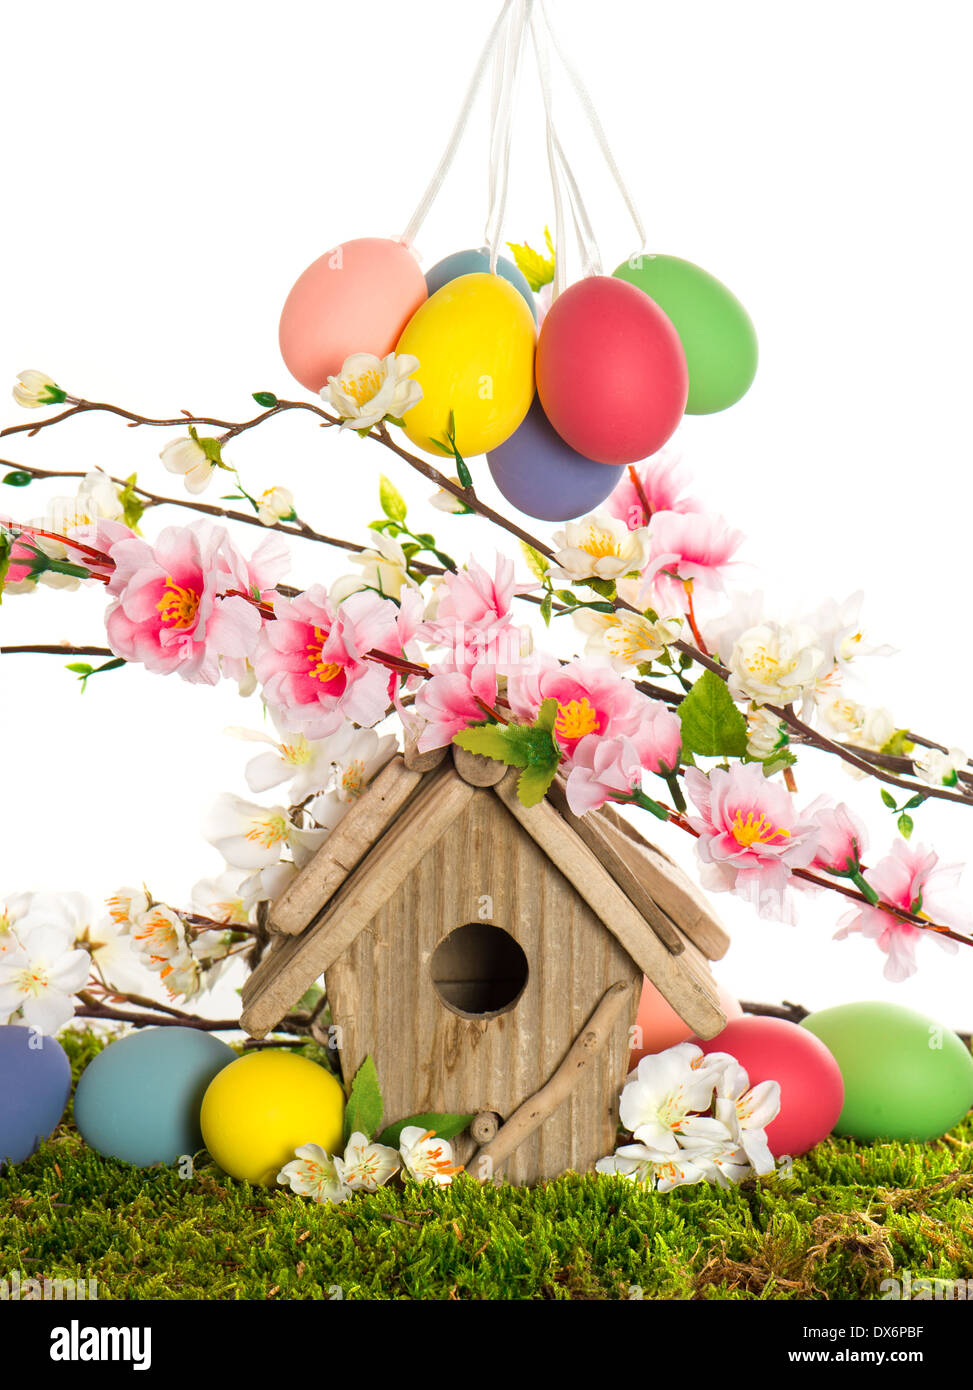 colorful easter decoration with birdhouse and eggs on green grass. spring apple and cherry blossoming Stock Photo